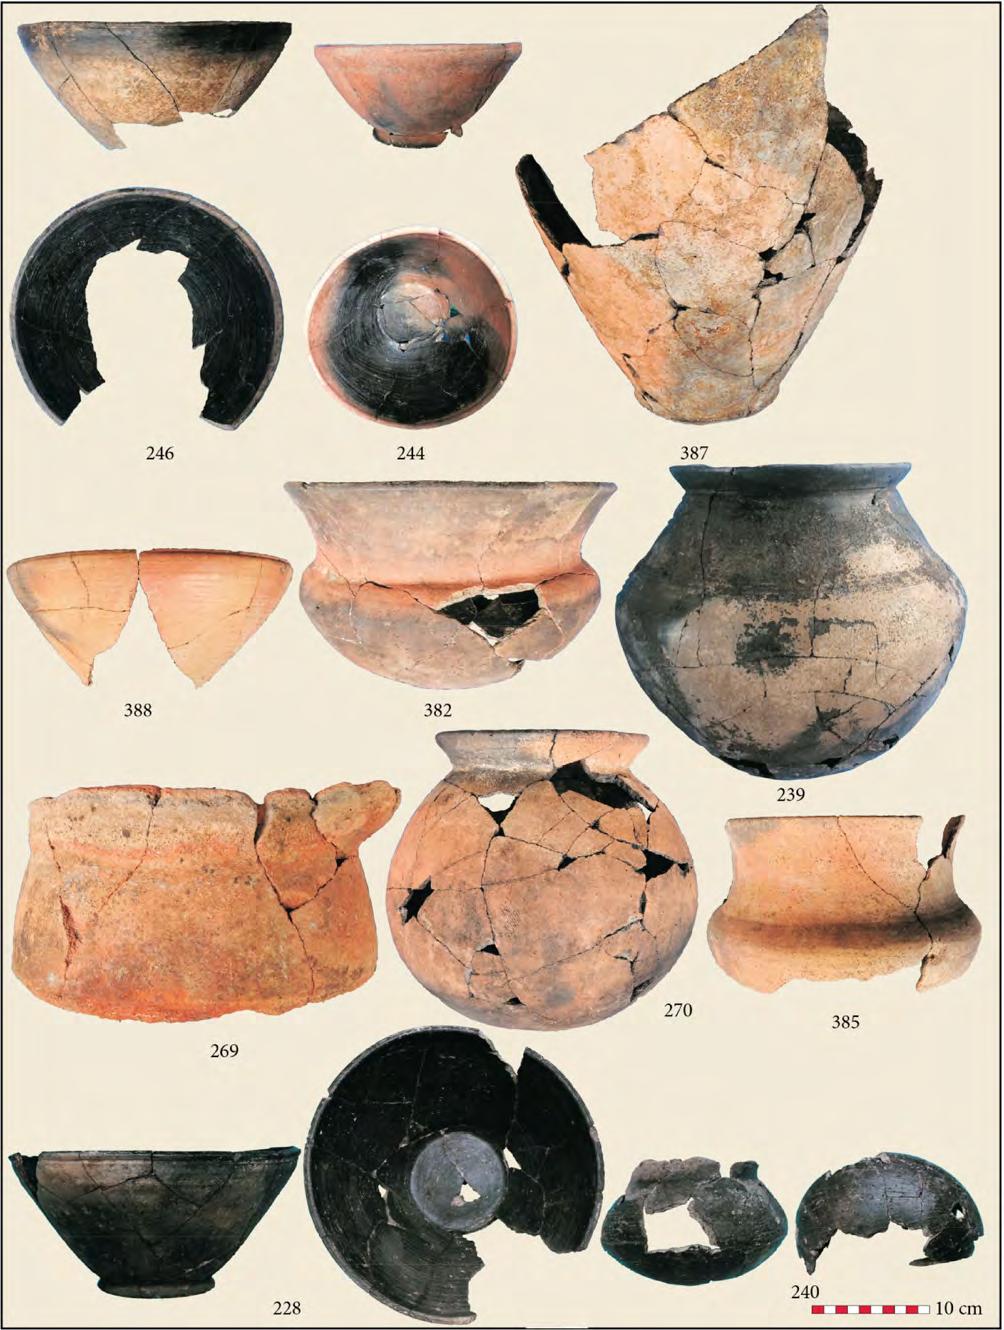 HIGHAM ET AL.: THE EXCAVATION OF NON BAN JAK, NORTHEAST THAILAND - A REPORT ON THE FIRST THREE SEASONS Figure 36: The ceramic vessels from occupation contexts Cat. B1 5:1 F1; cat. 244 B2 5:1 F2; cat.